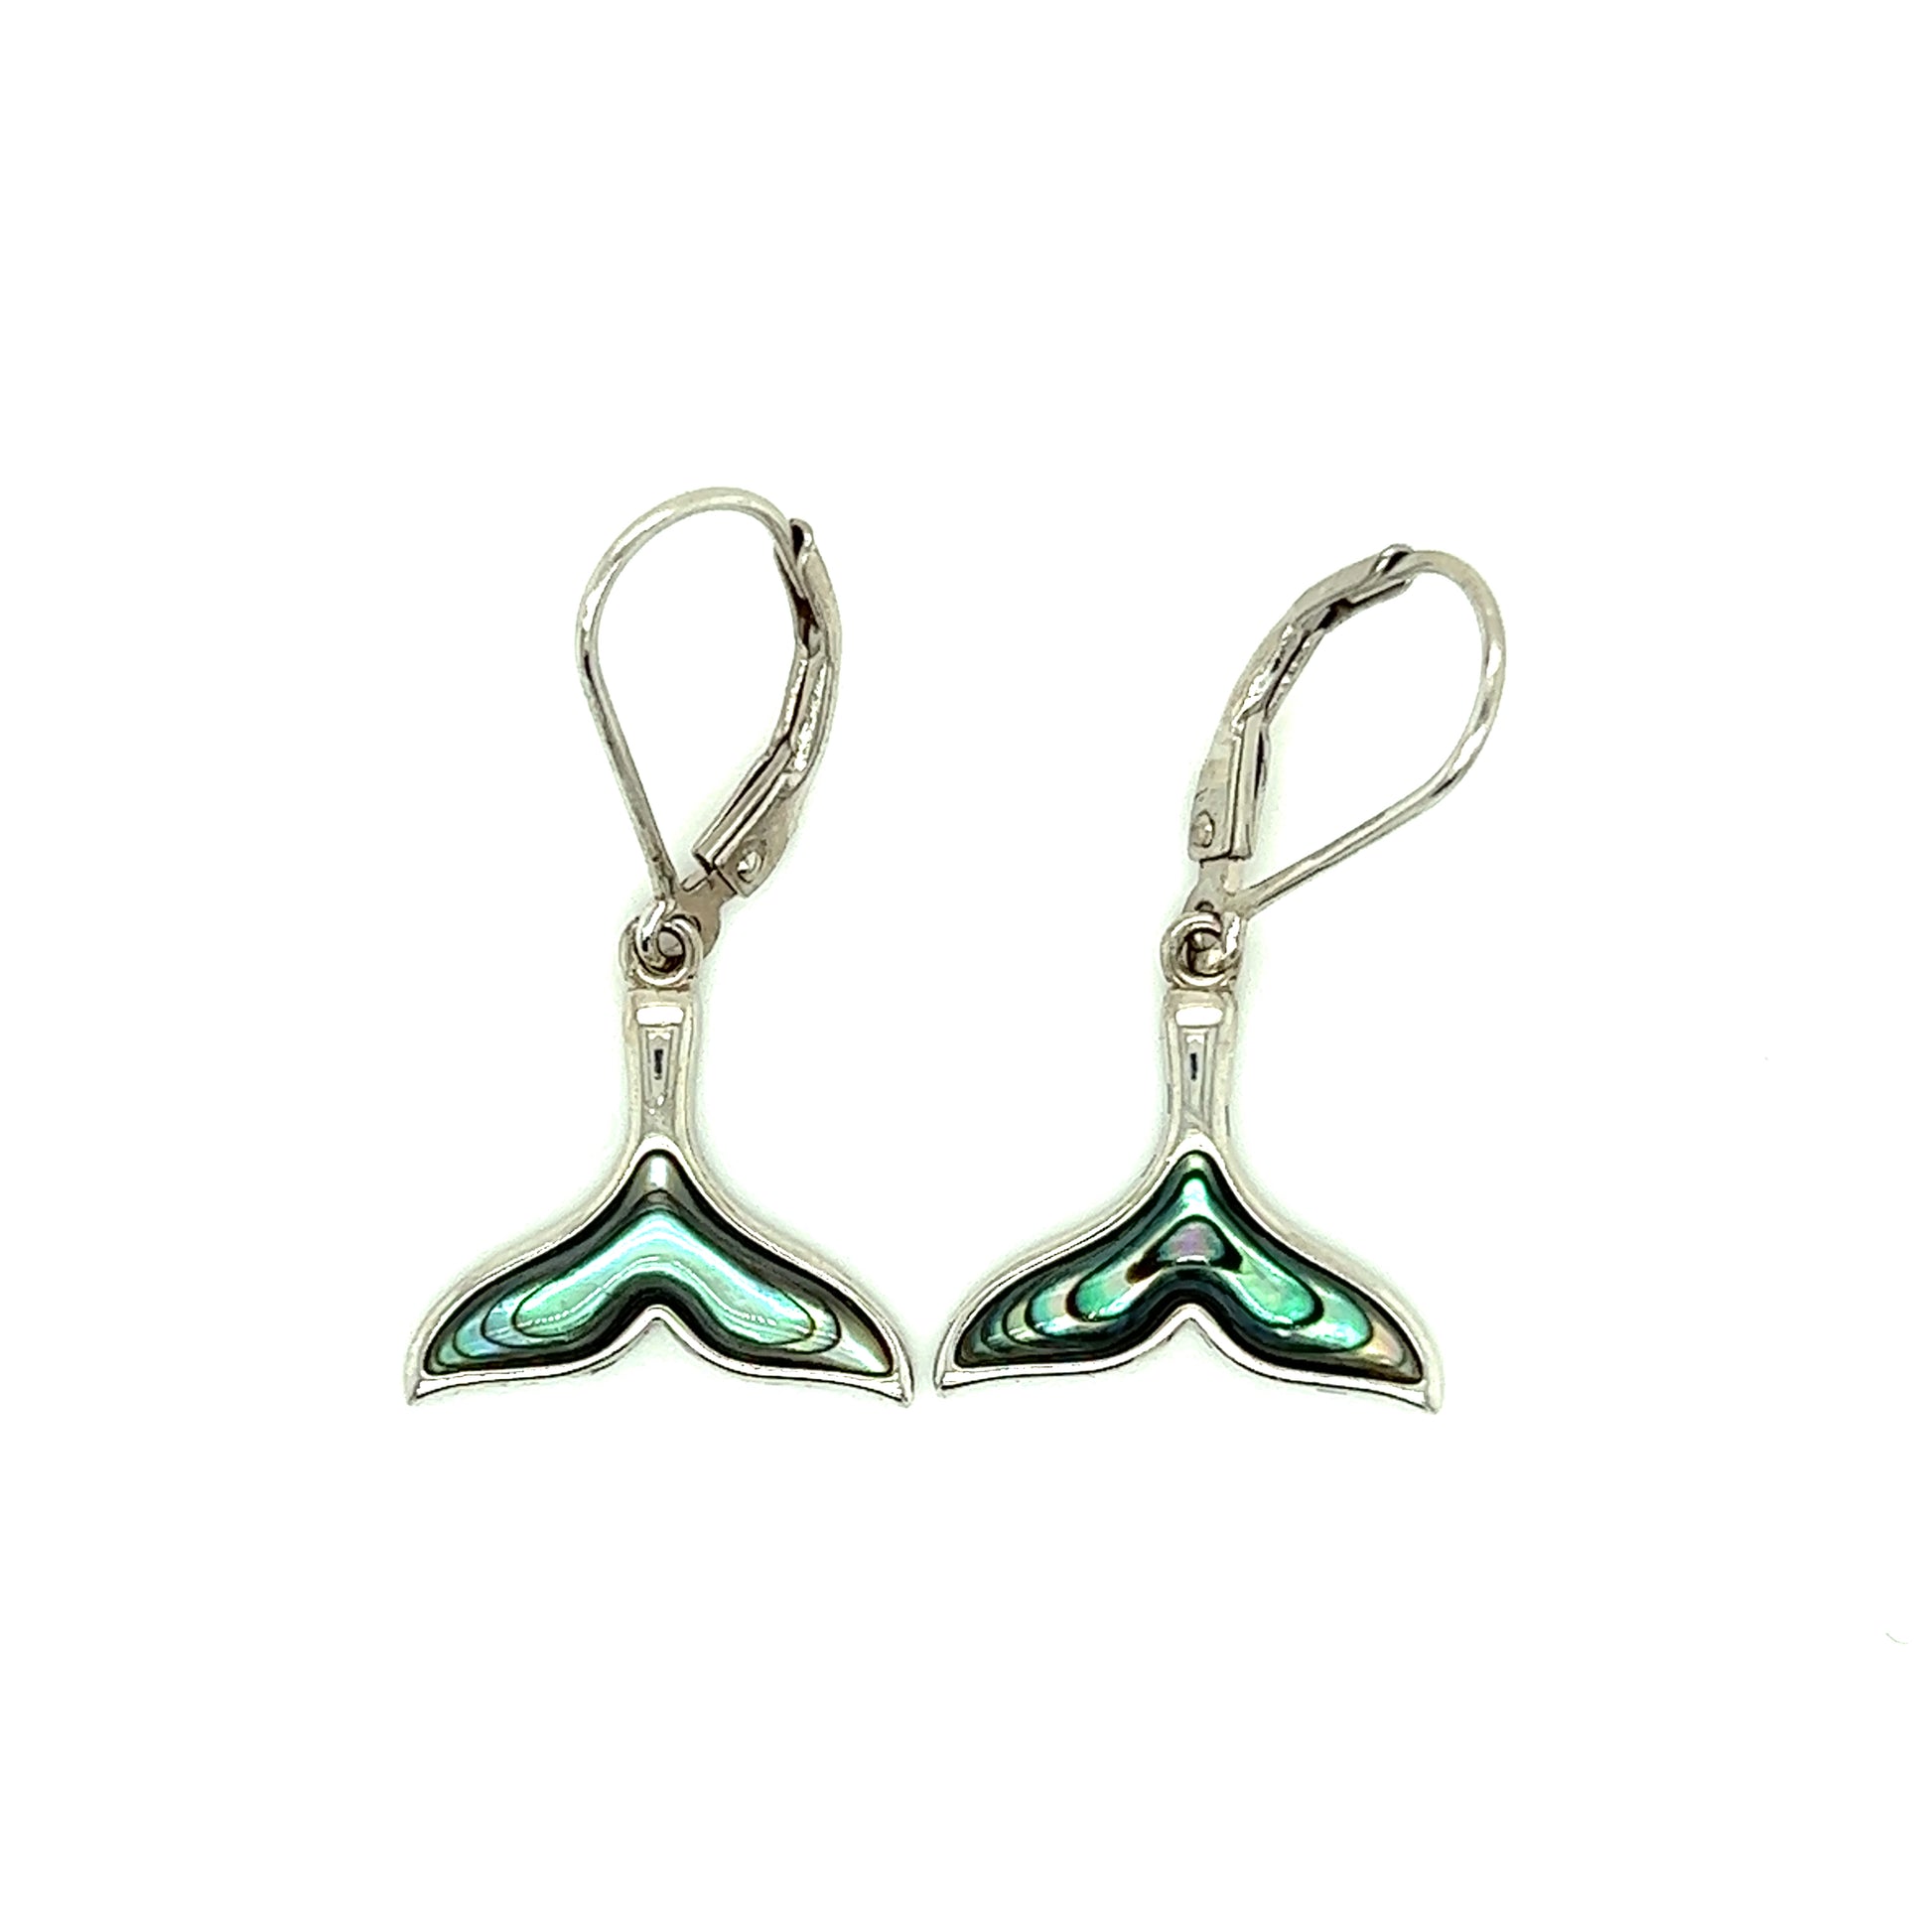 Whale Tail Dangle Earrings with Abalone Shell Details in Sterling Silver Front View